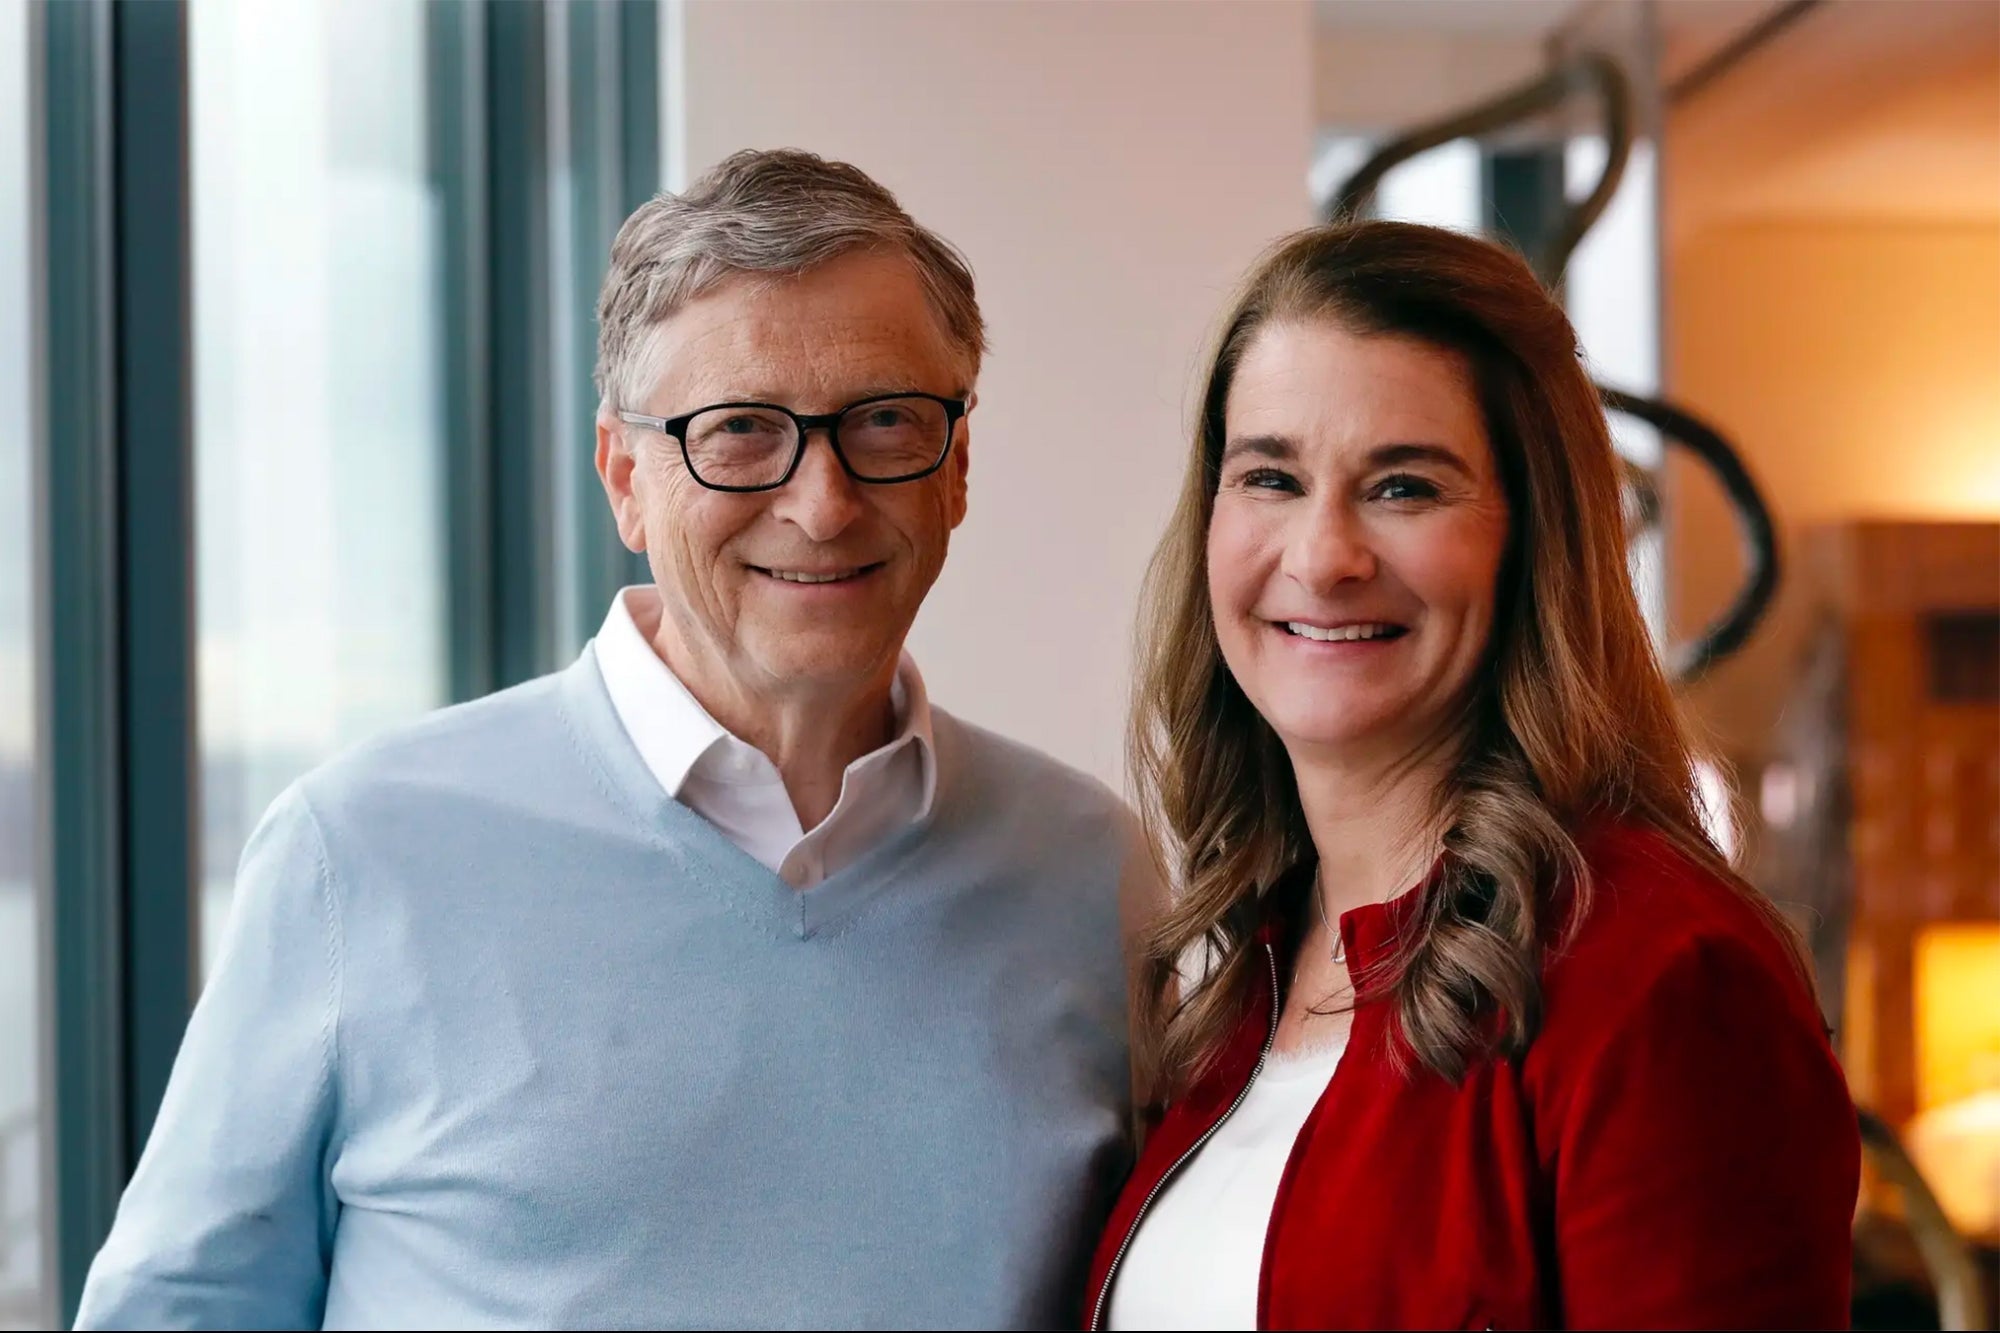 Is Bill Gates’s relationship with Jeffrey Epstein responsible for his divorce?